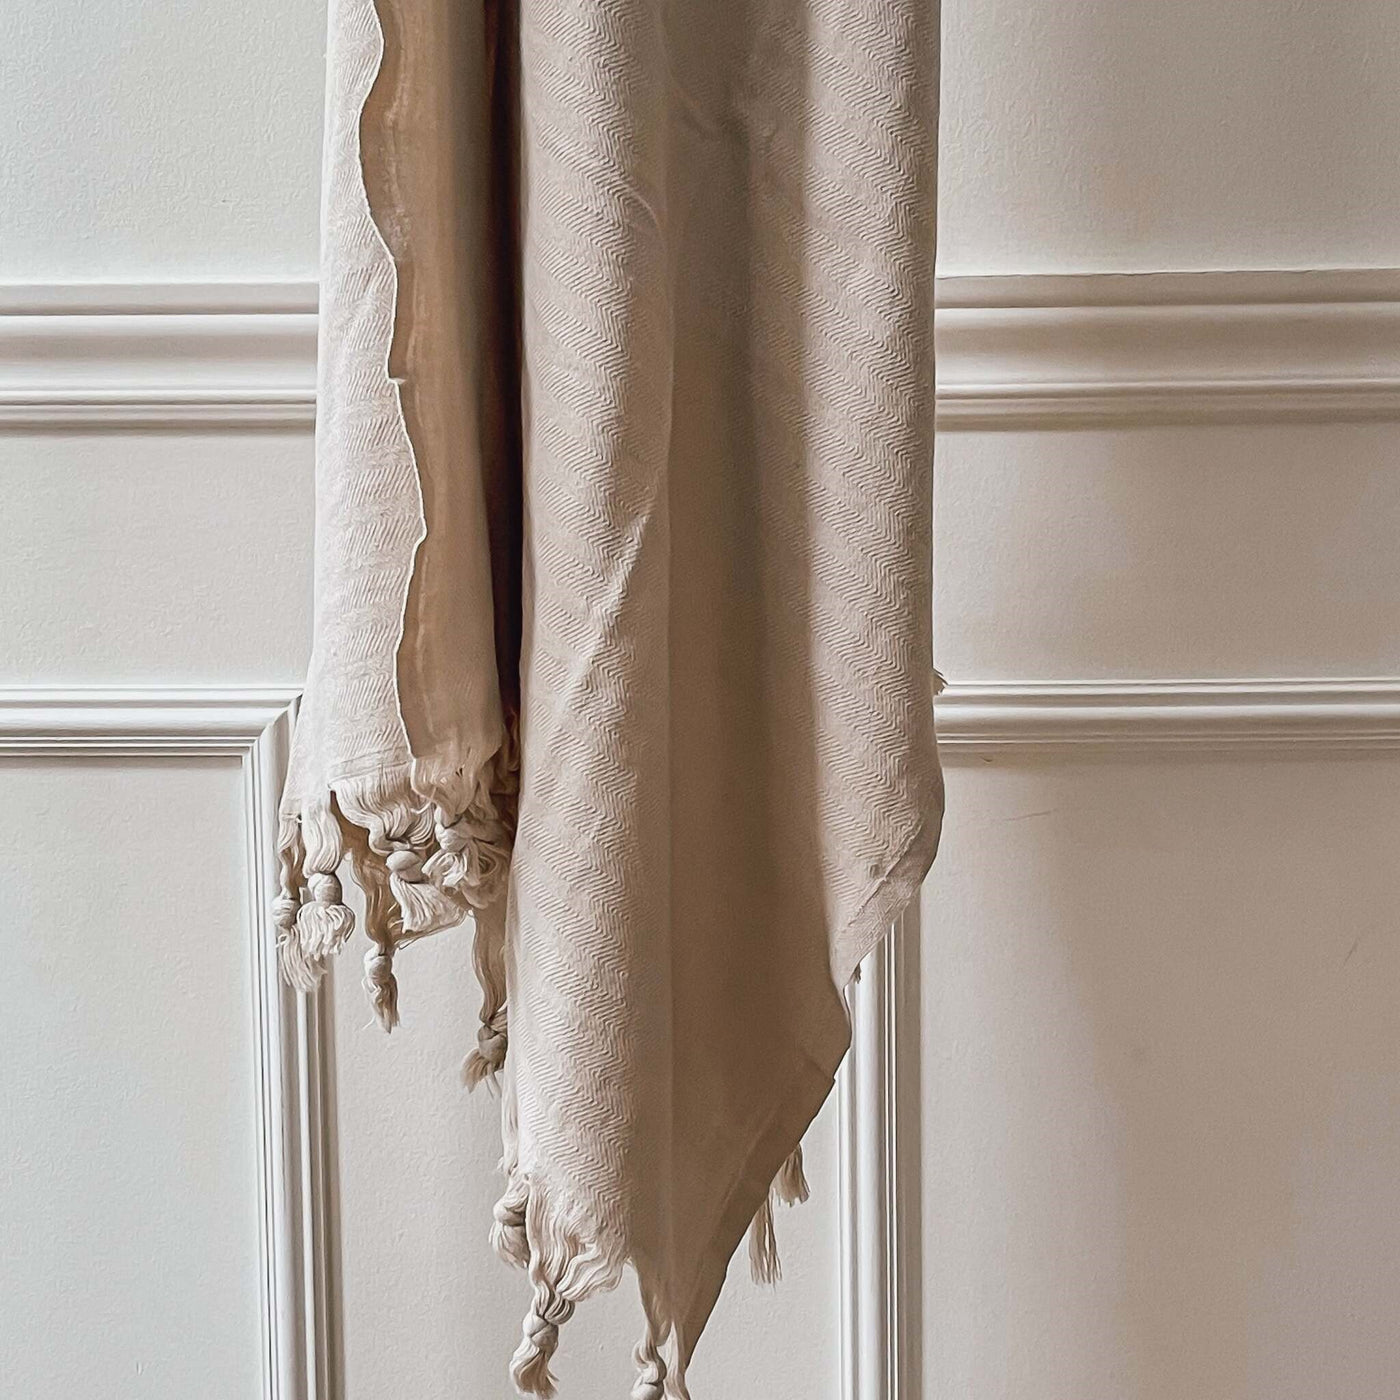 Turkish Bath Towel, Oat: Larger than most typical towels. Neutral hue with added tassels add elegance. For use at home, bath, & beach.